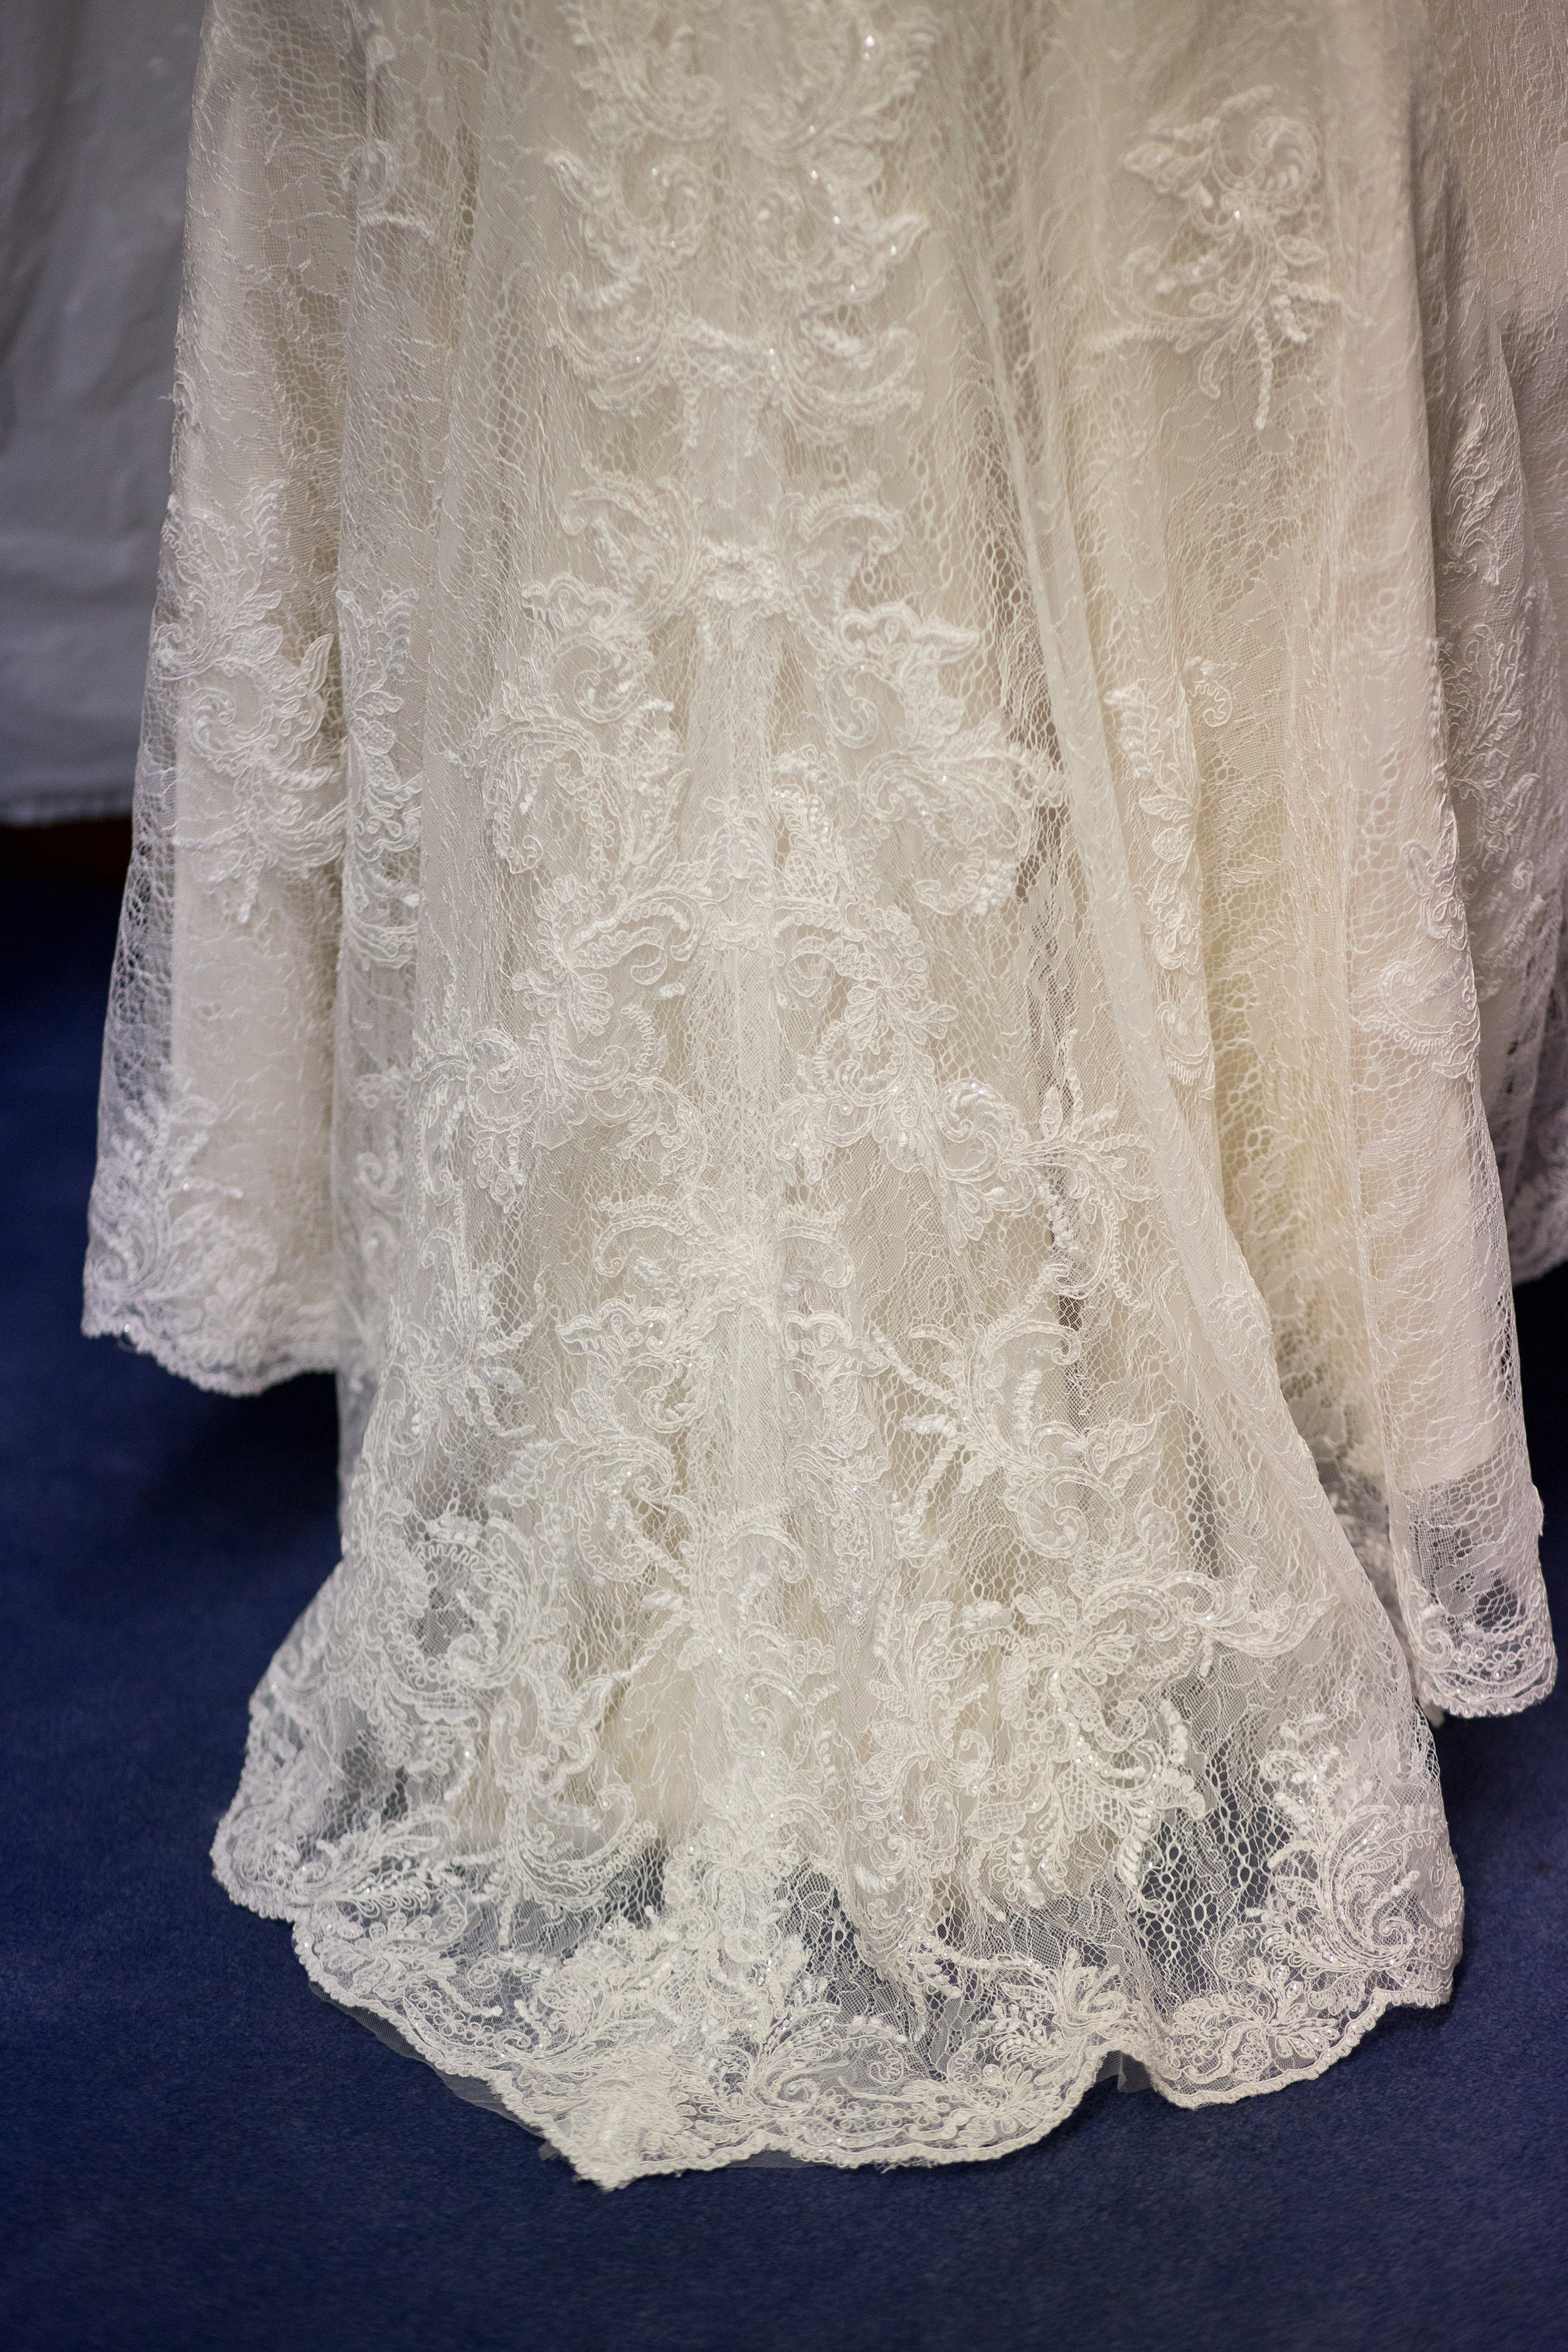 Long lace bridal gown for wedding in Colorado Springs at First Baptist Church Stacy Carosa Photography